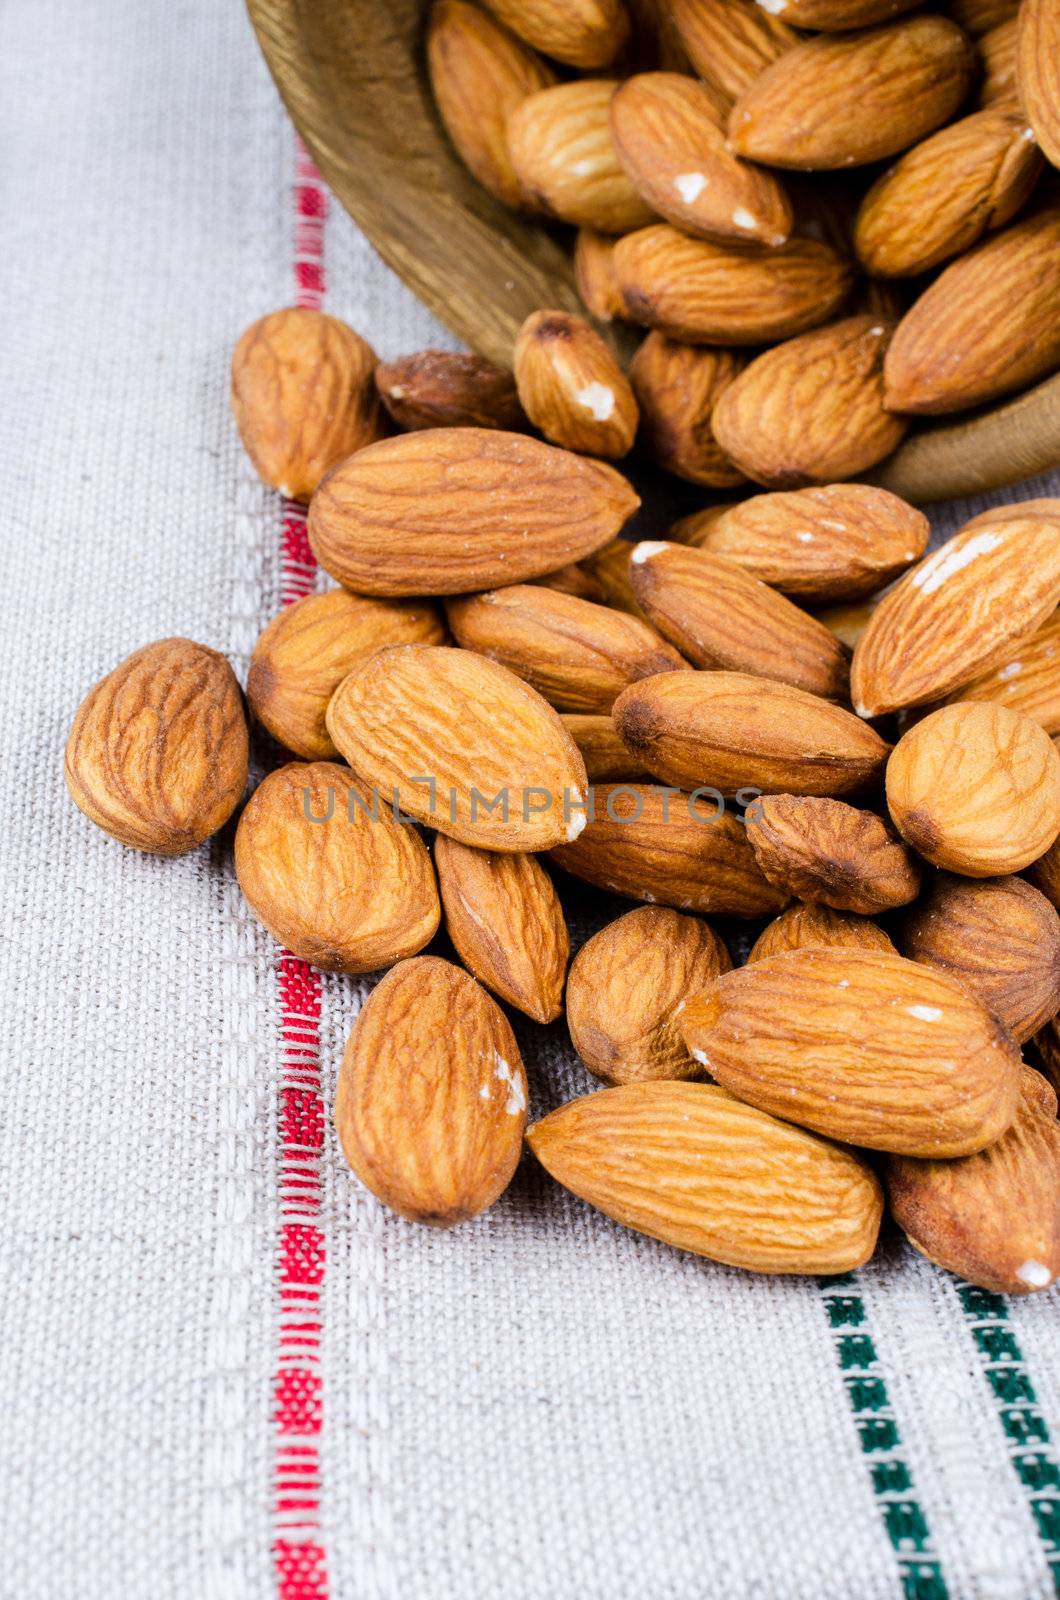 Almonds on a table cloth